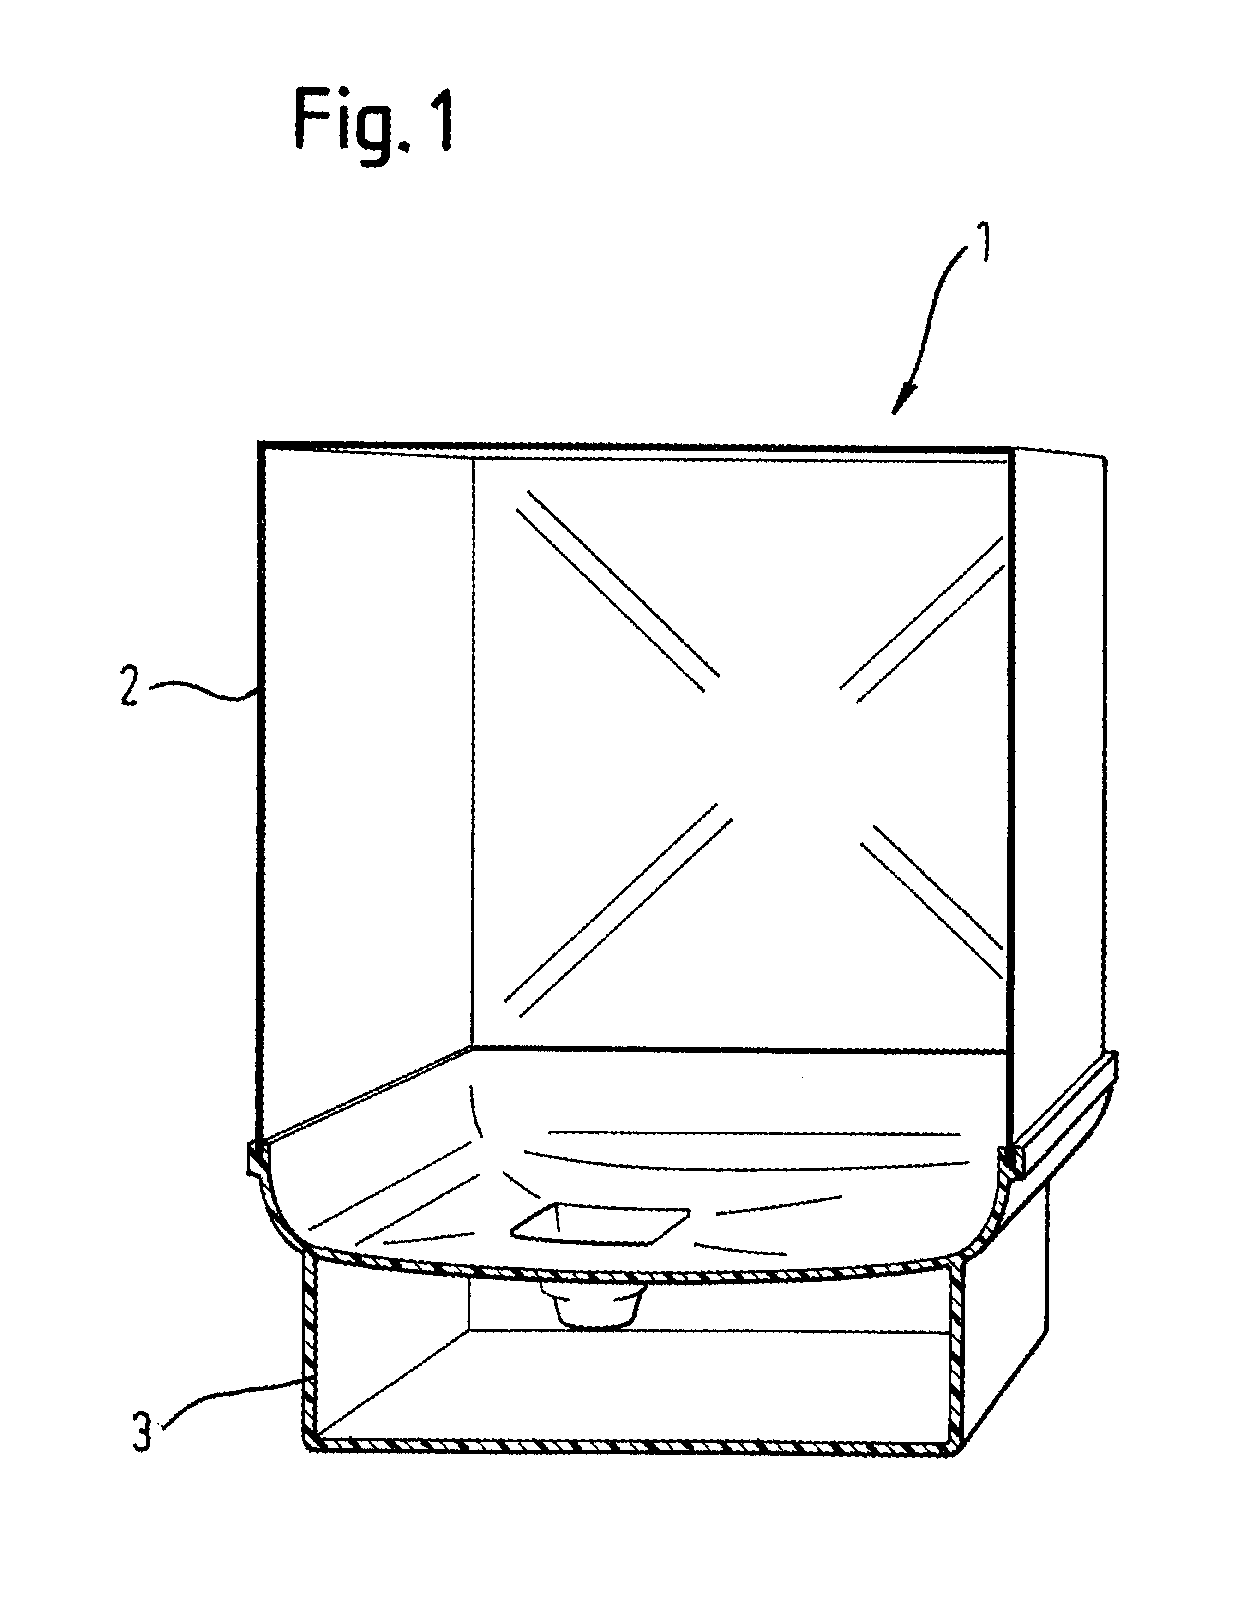 Two-piece washing tank for a dishwasher and a method for manufacturing a two-piece washing tank for dishwashers